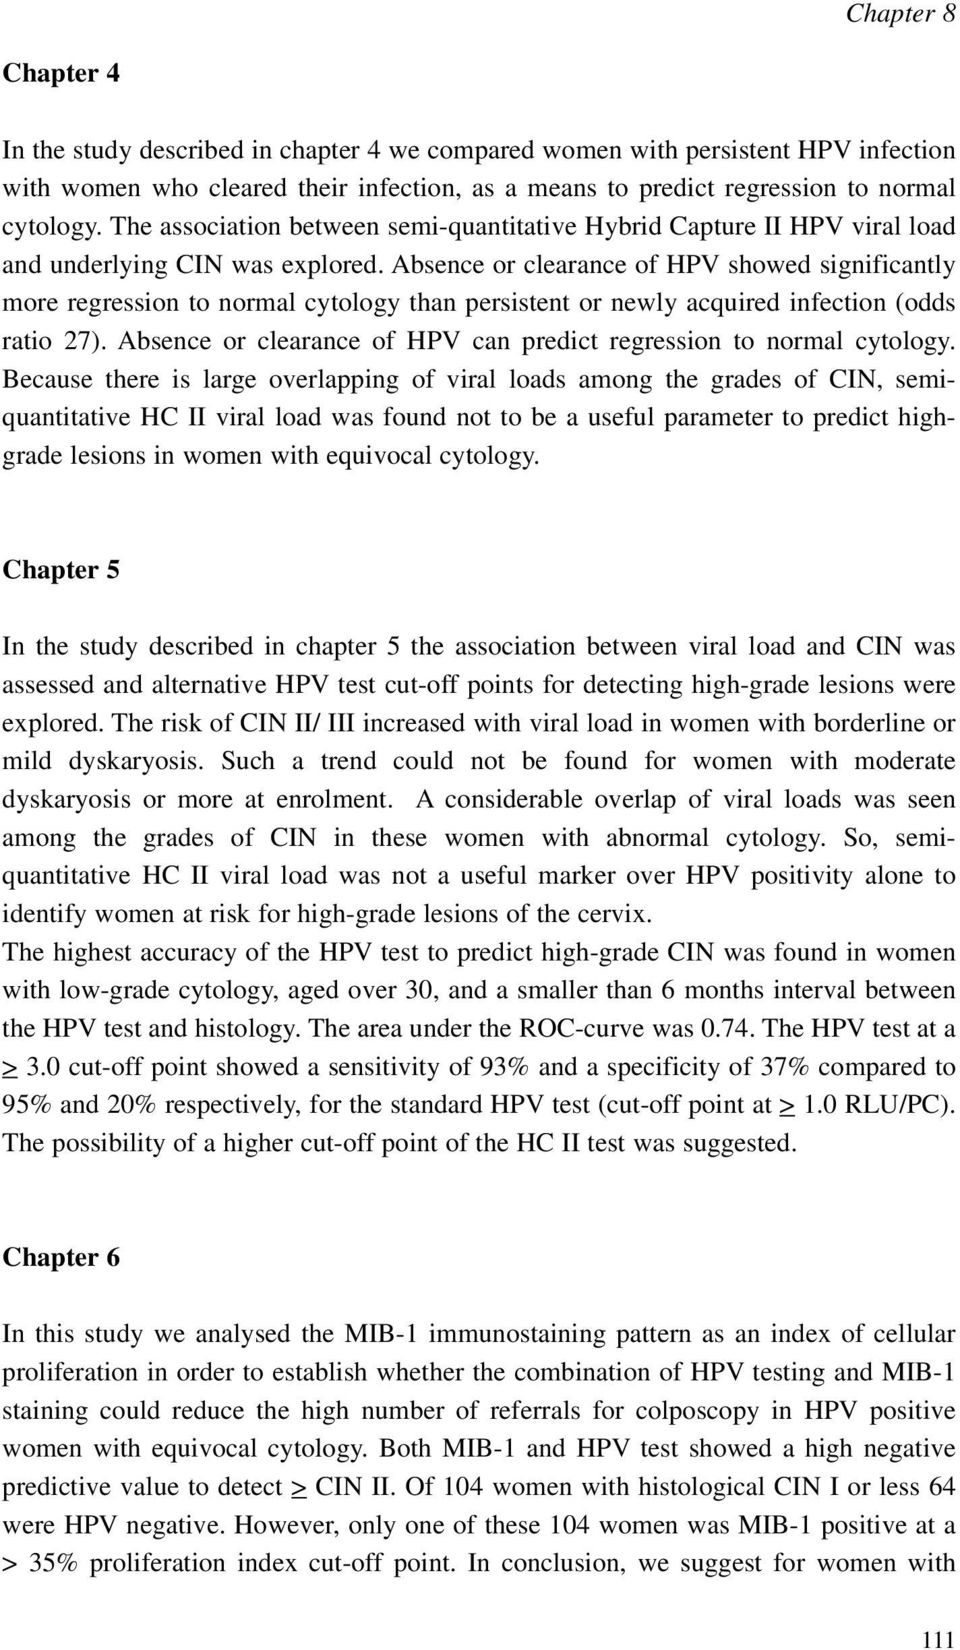 Absence or clearance of HPV showed significantly more regression to normal cytology than persistent or newly acquired infection (odds ratio 27).